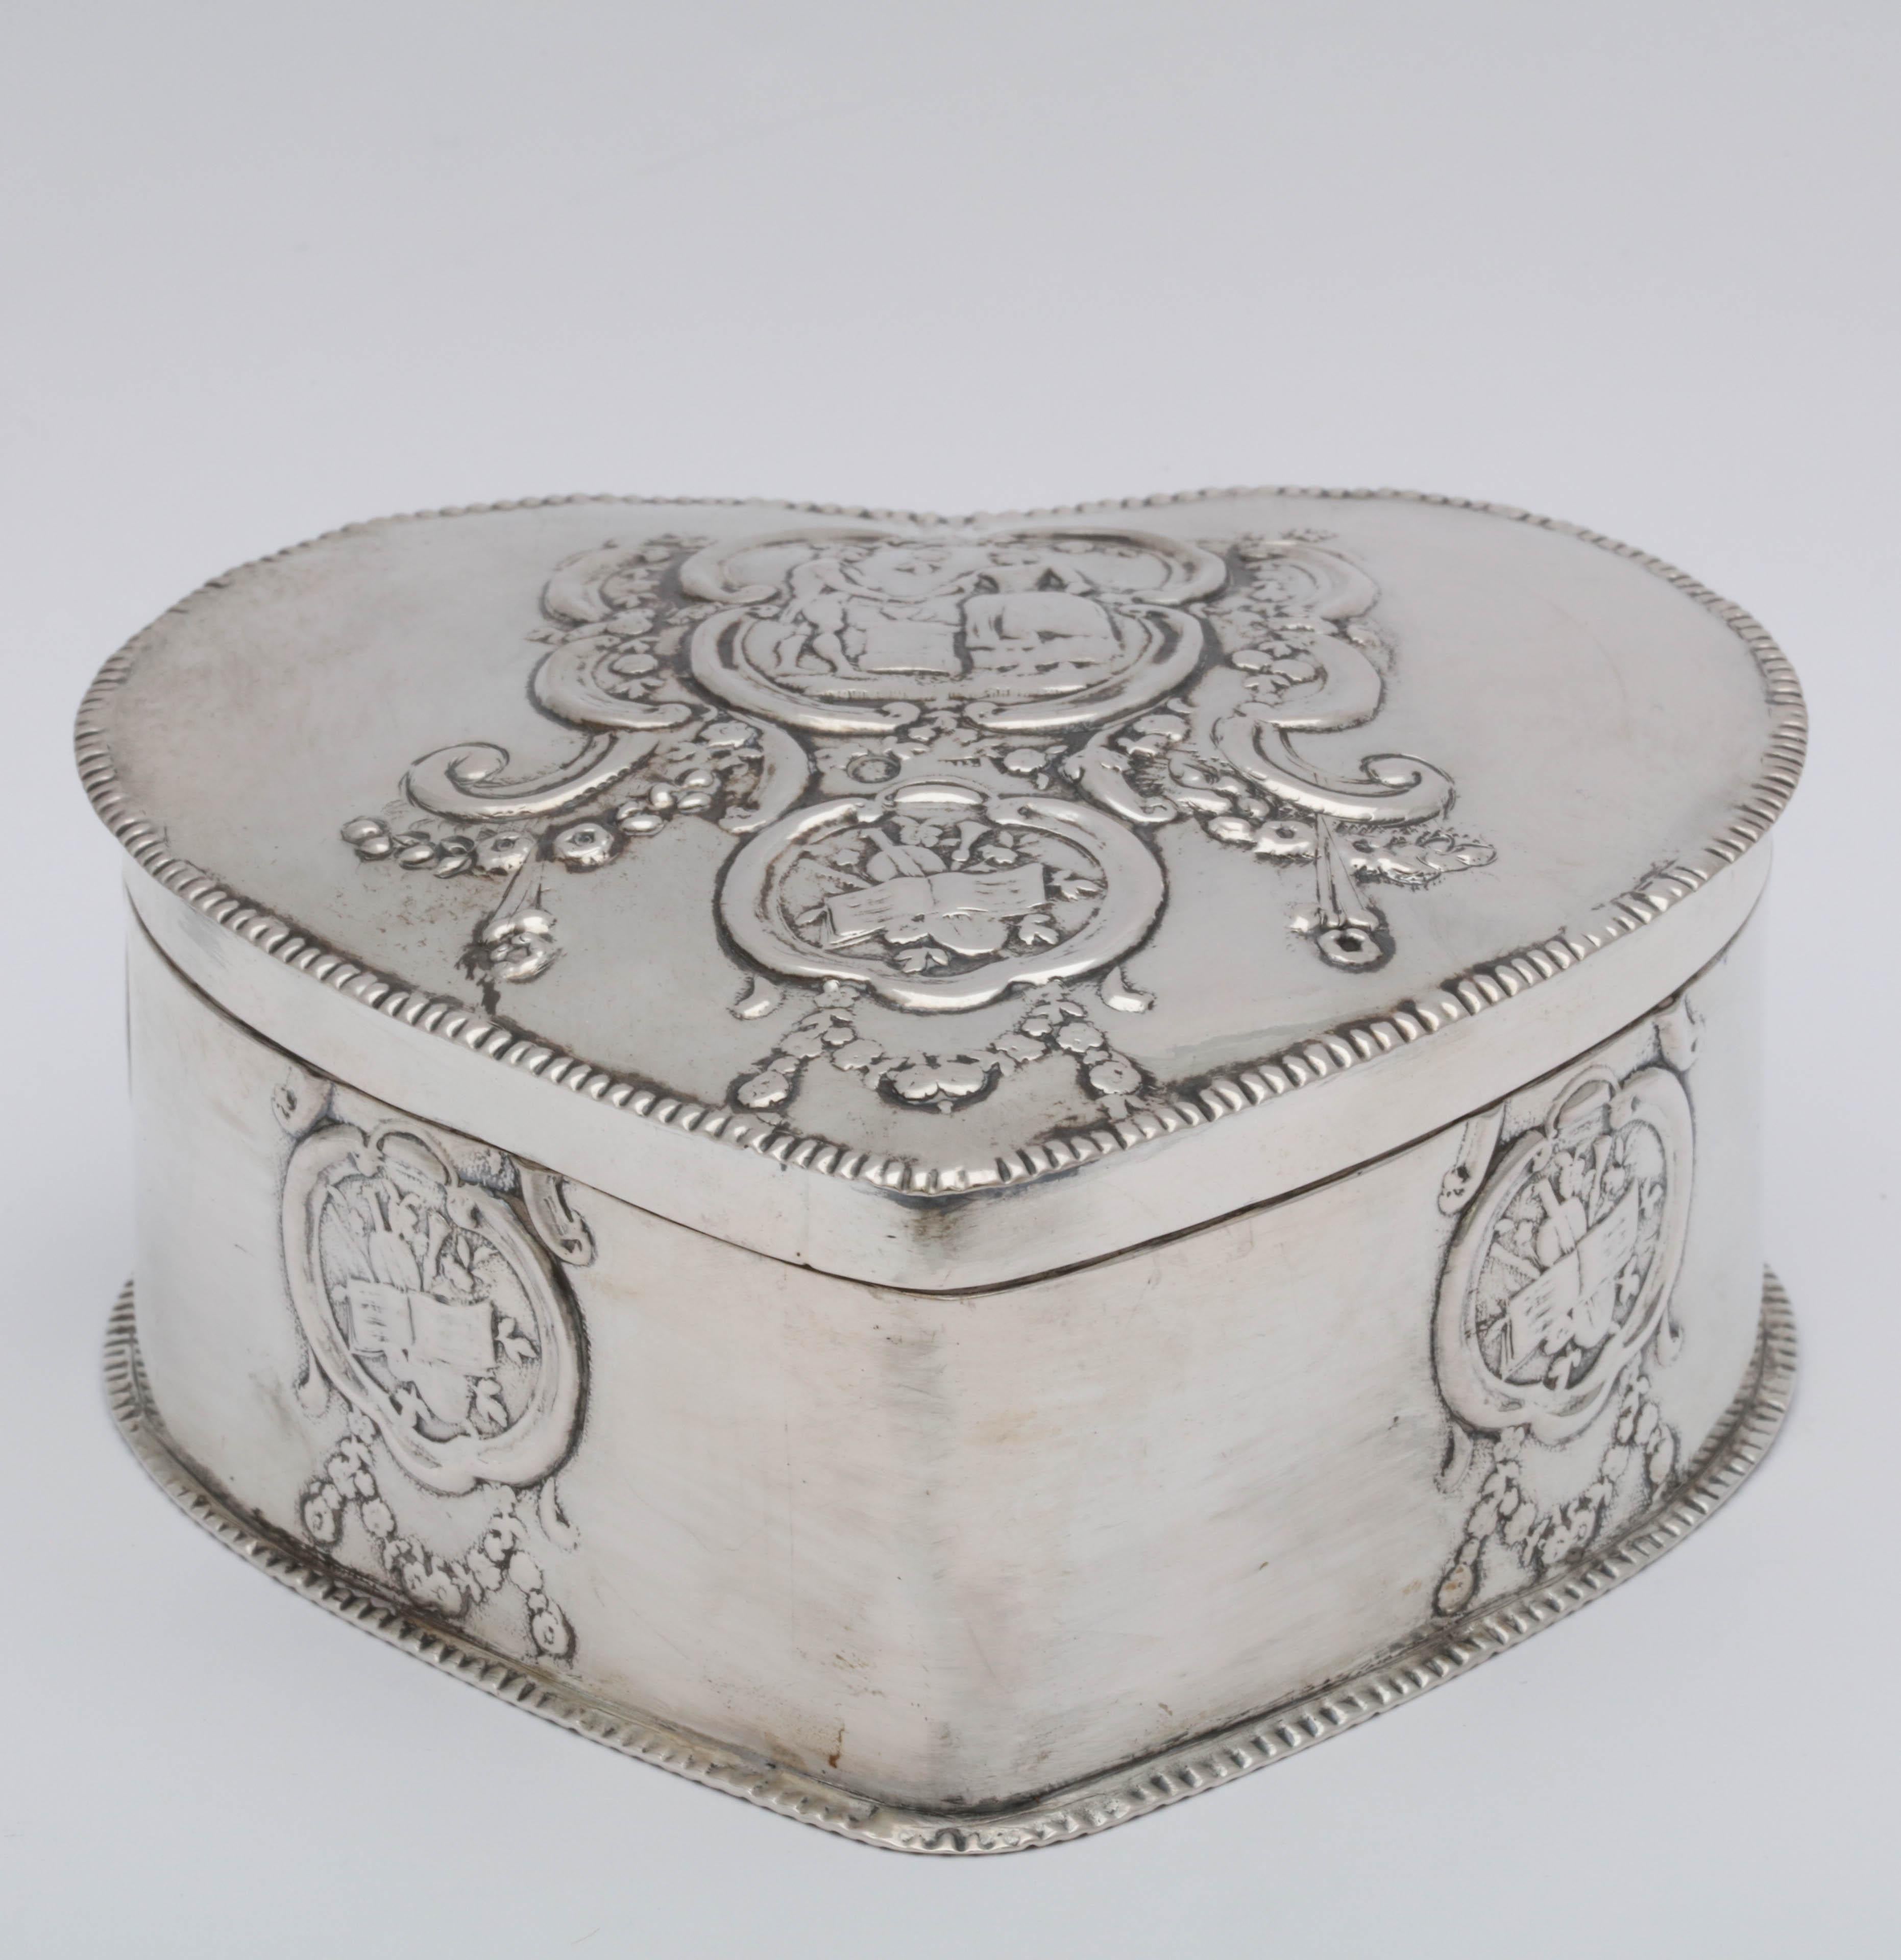 Dutch, Victorian, Continental silver (.800) heart-form box with hinged lid, Netherlands, year-marked for 1901. Scene of a man and woman in center of lid; decorated with musical instruments, etc. on outer sides. Measures 4 1/4 inches across (at